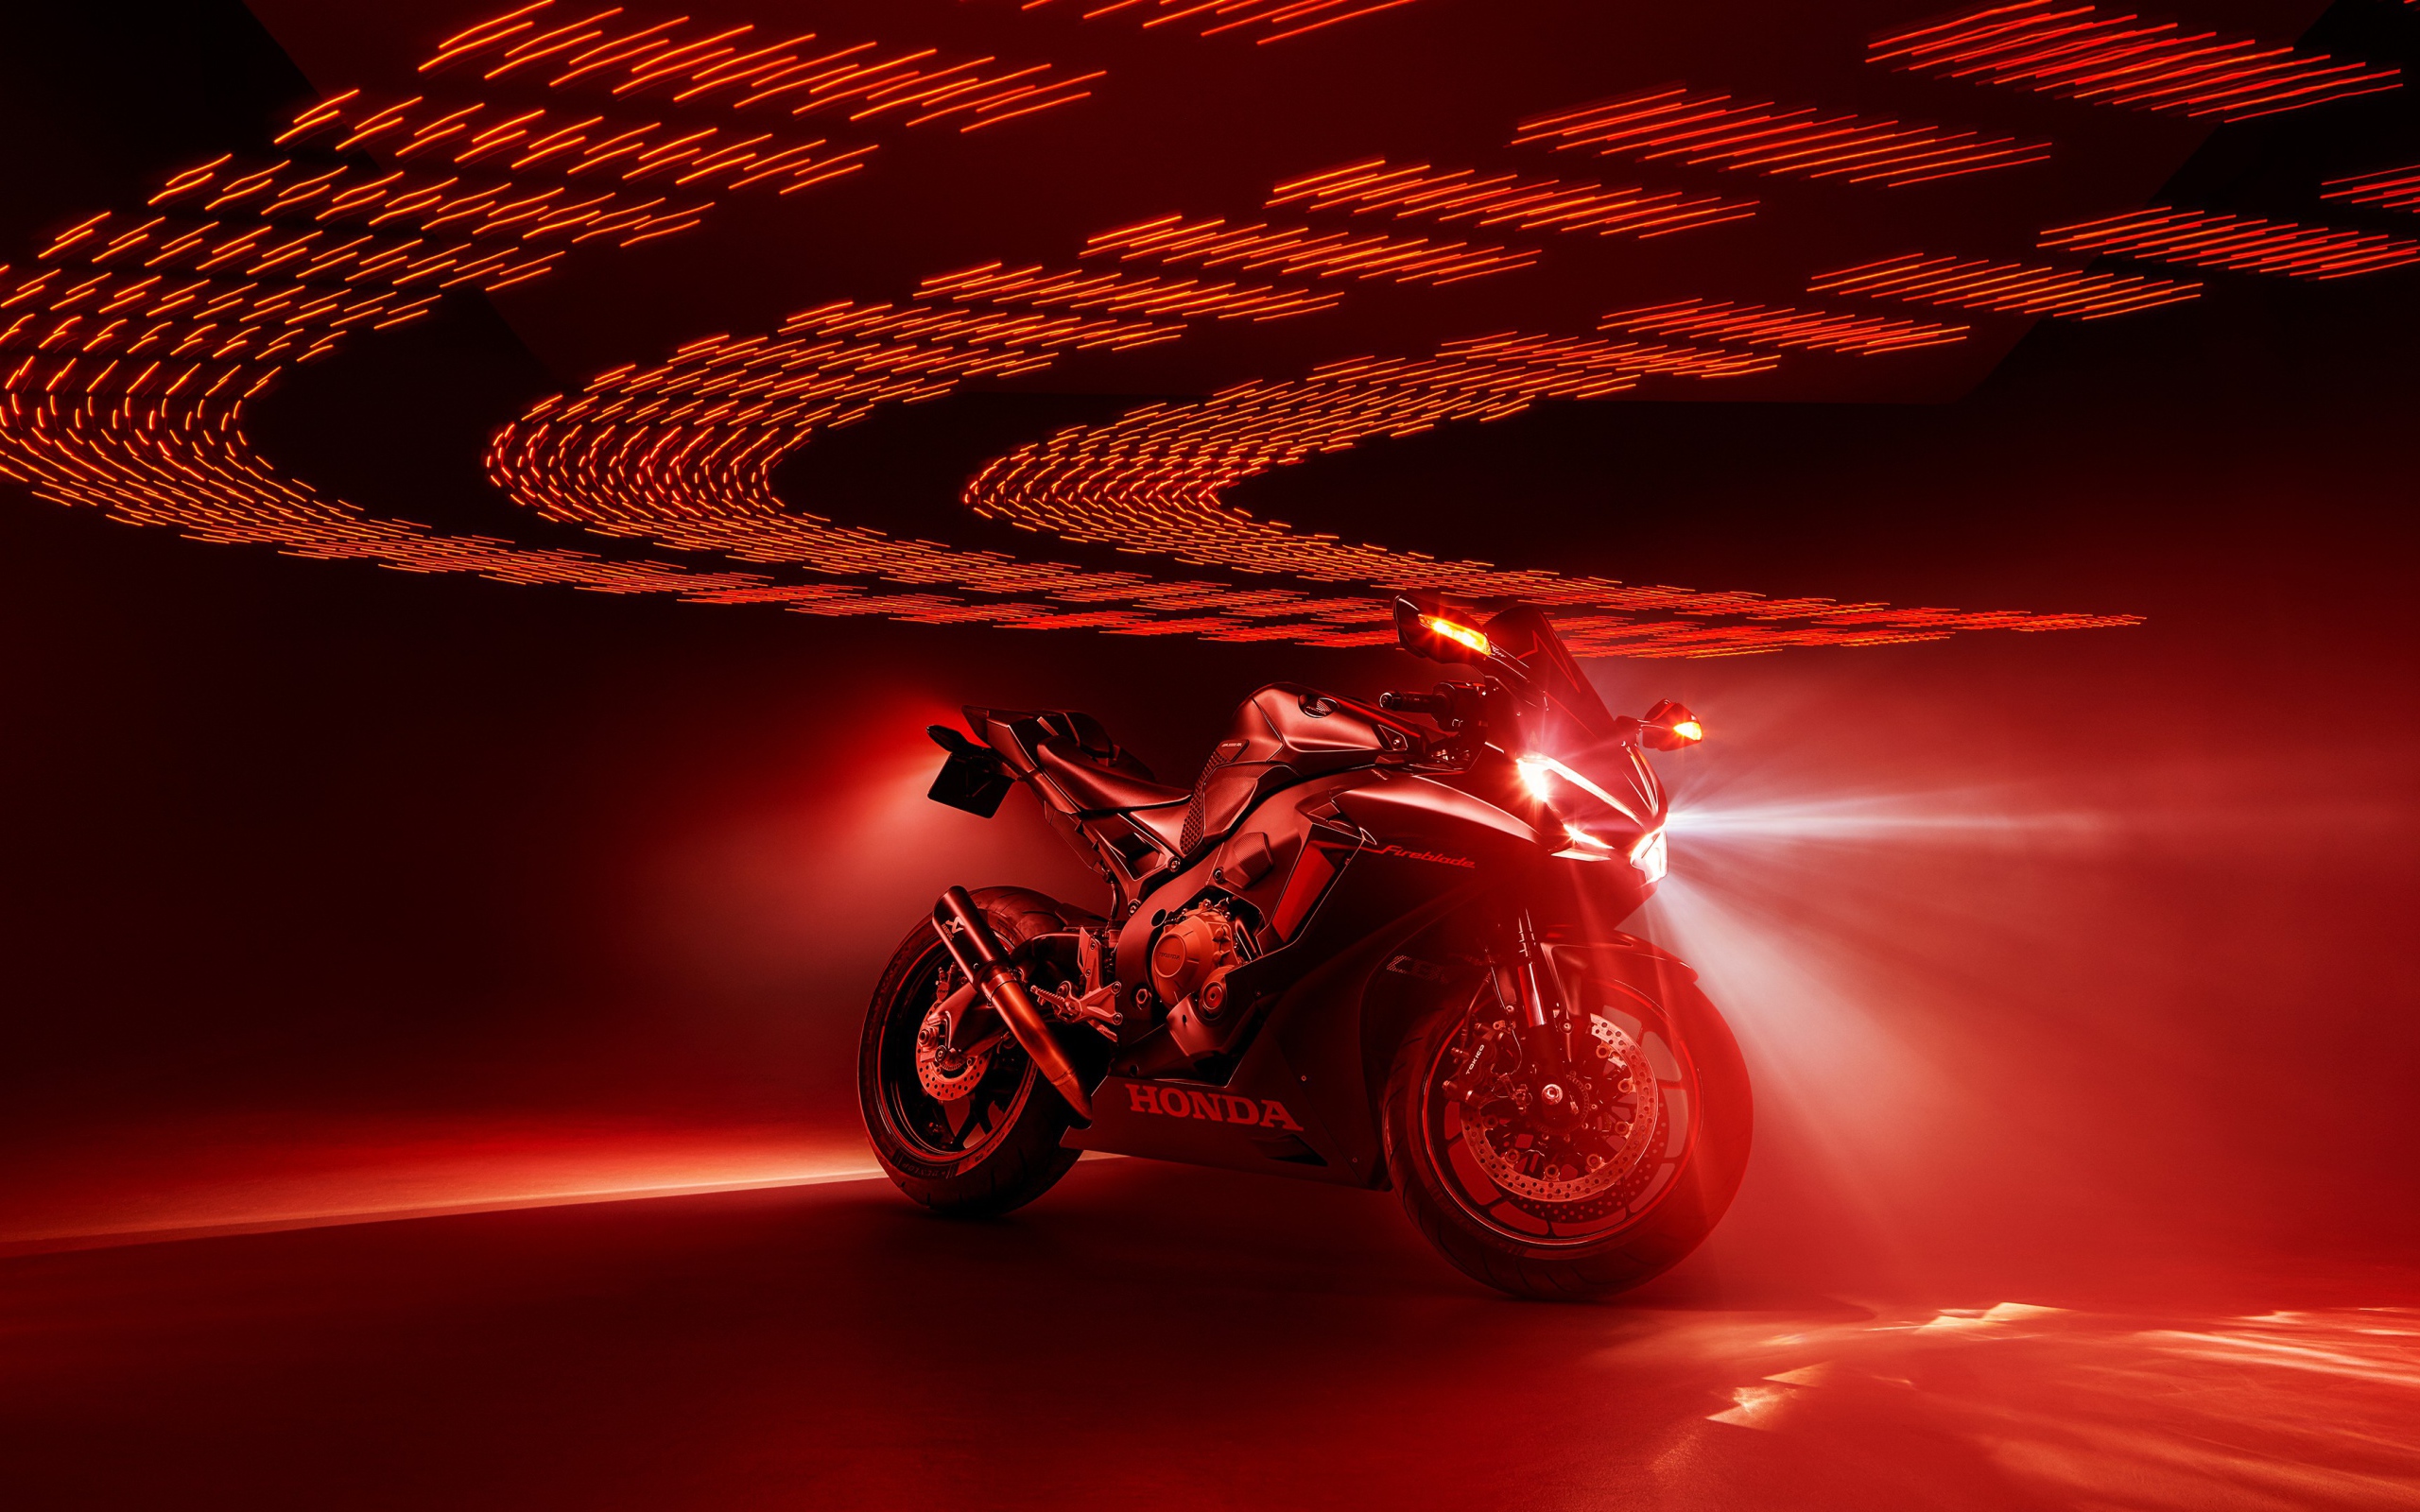 Honda Fireblade motorcycle on a red background Desktop wallpapers 2560x1600